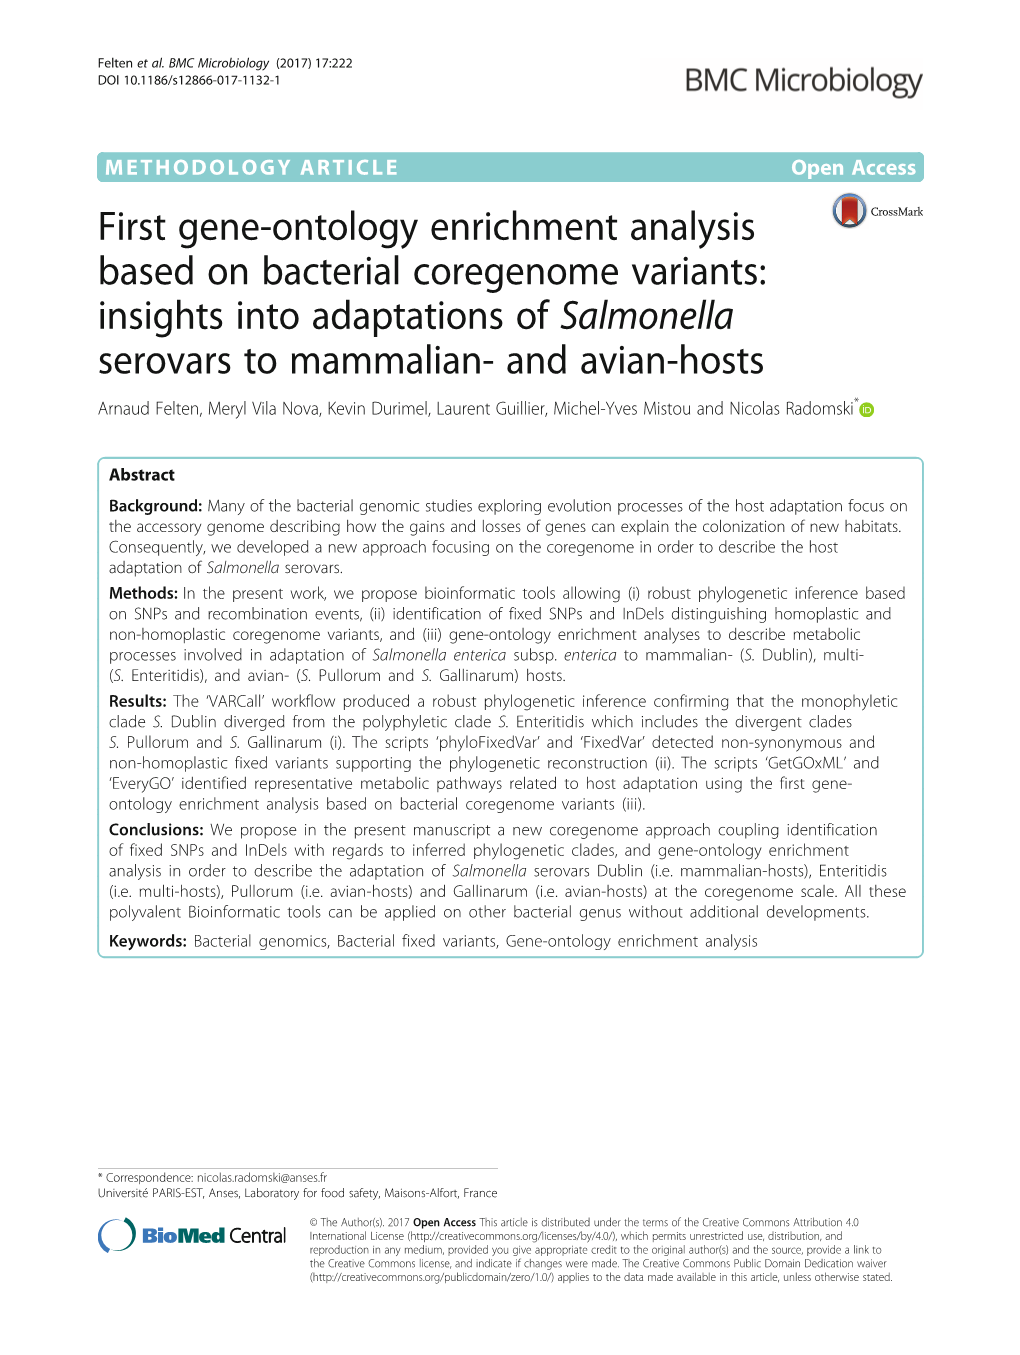 First Gene-Ontology Enrichment Analysis Based